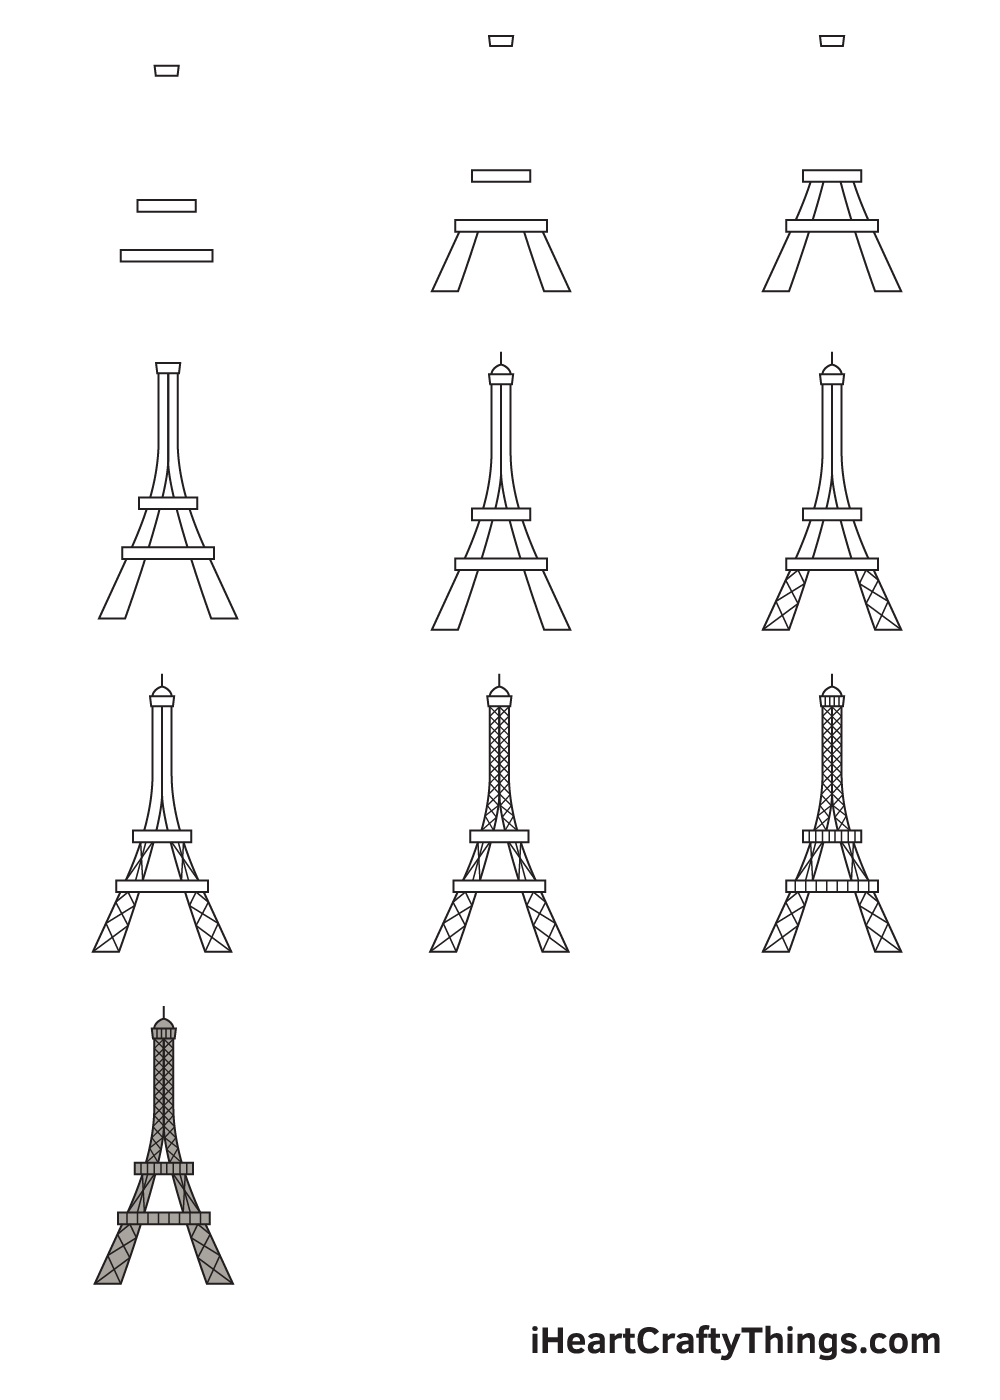 1,509 Radio Tower Drawing Images, Stock Photos & Vectors | Shutterstock